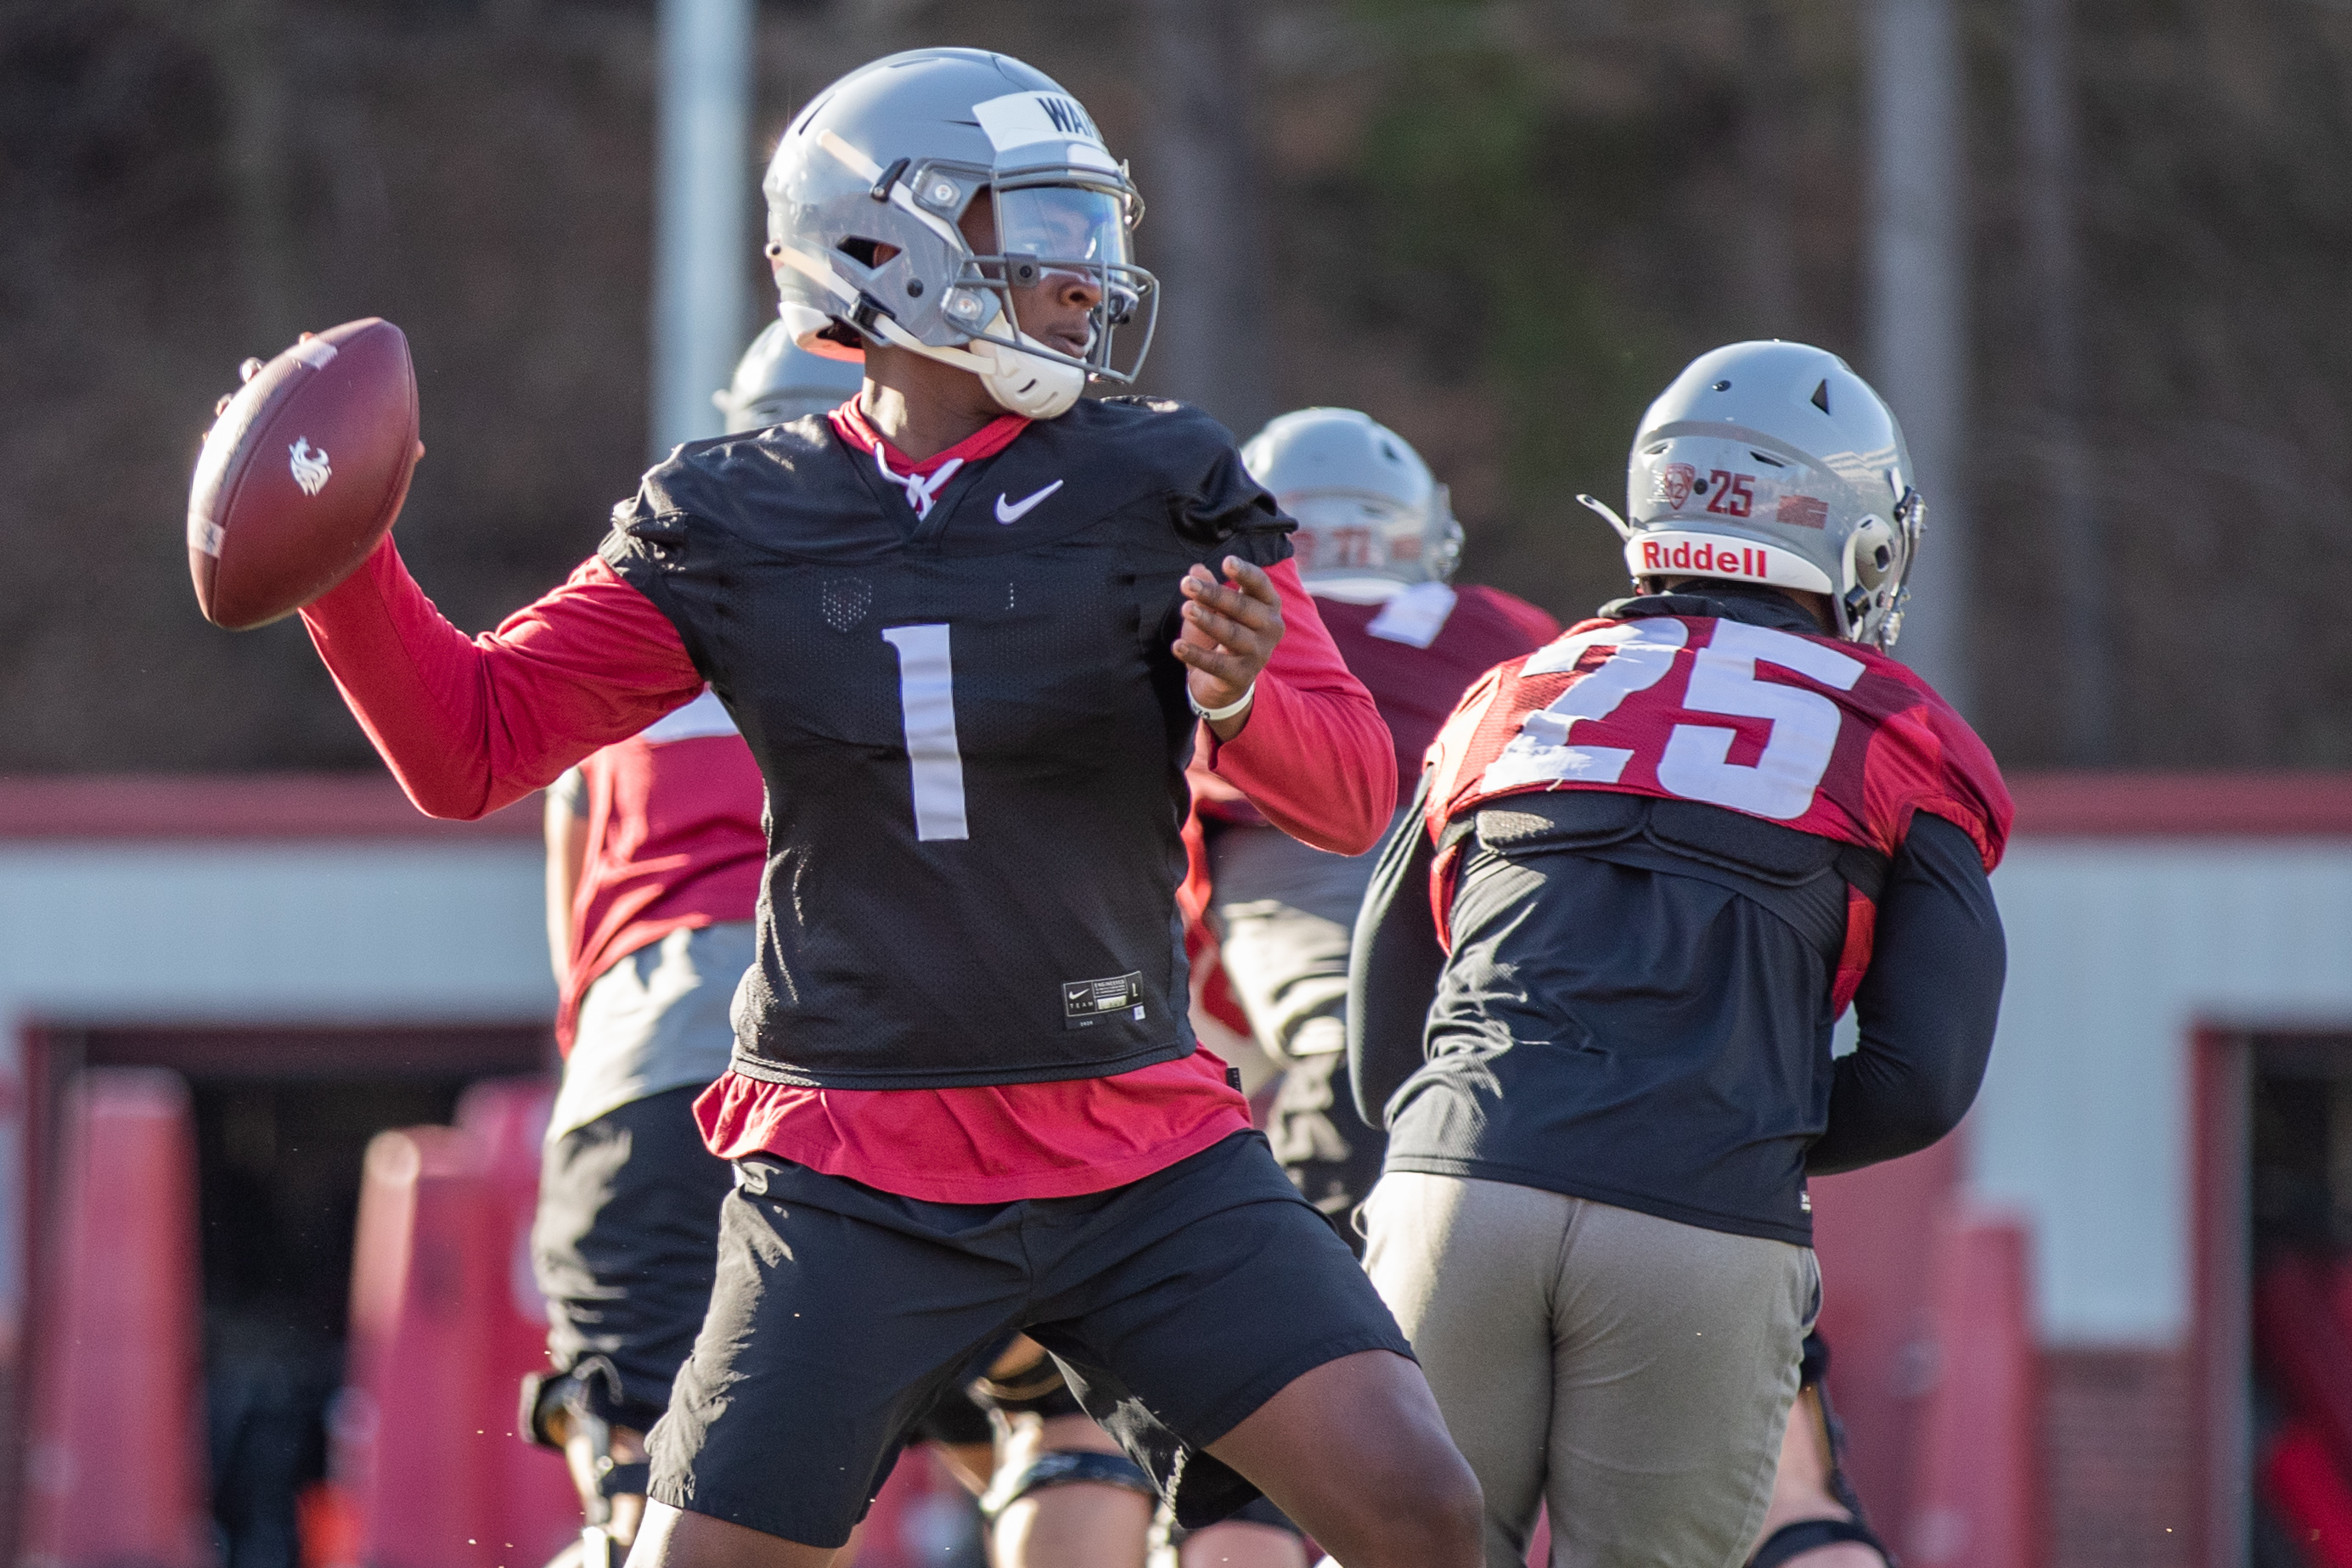 PULLMAN, WA - MARCH 24: Washington State Cougars football program takes to Rogers Field for spring practice